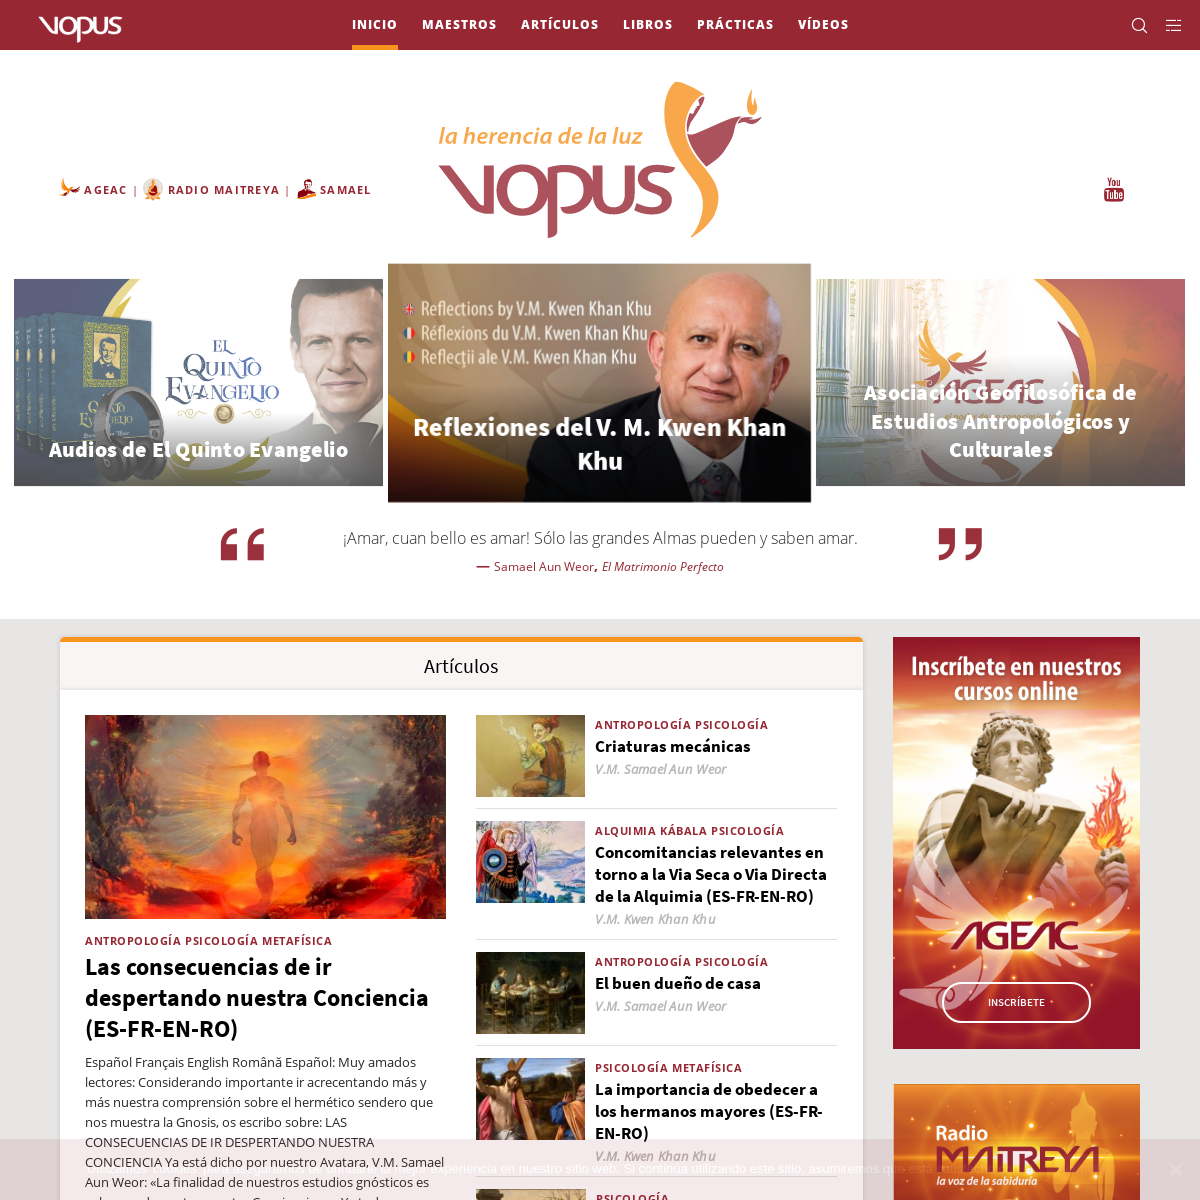 A complete backup of vopus.org